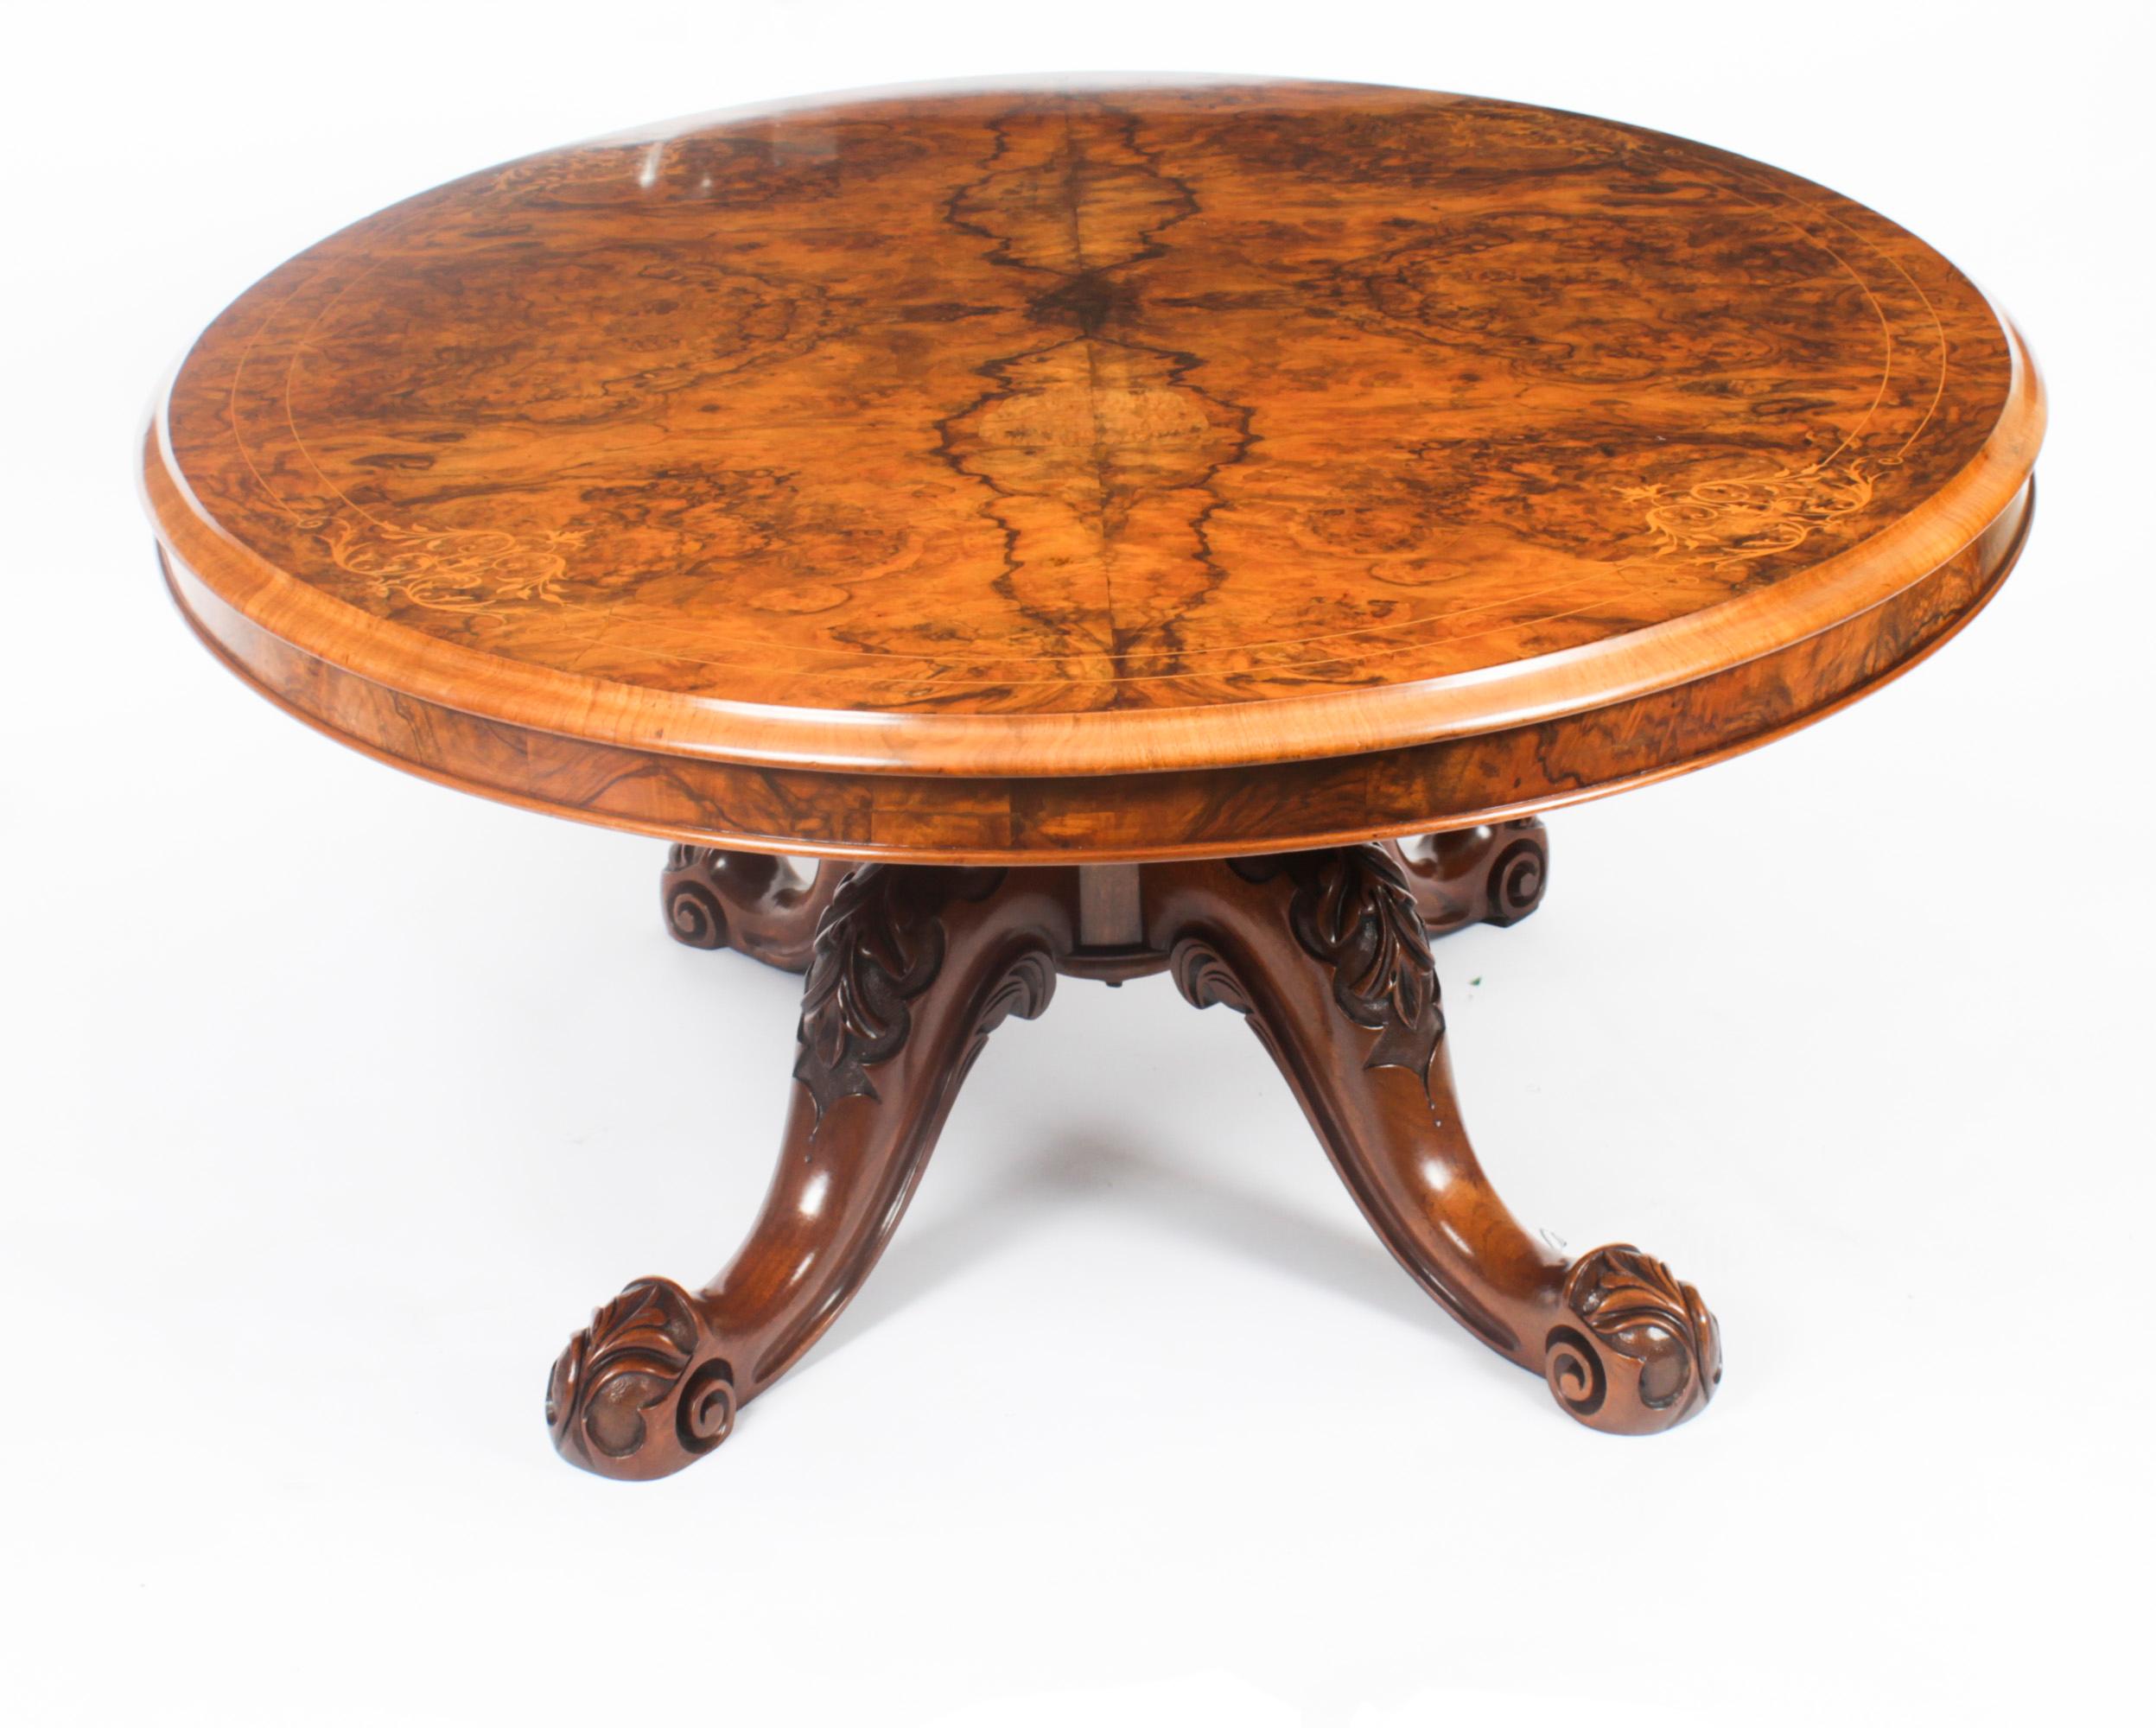 This is a lovely antique Victorian burr walnut and marquetry coffee table, circa 1860 in date

The oval moulded table top features beautiful inlaid marquetry decoration in a beautifully figured ‘mirrored’ walnut veneer.

The base has been hand